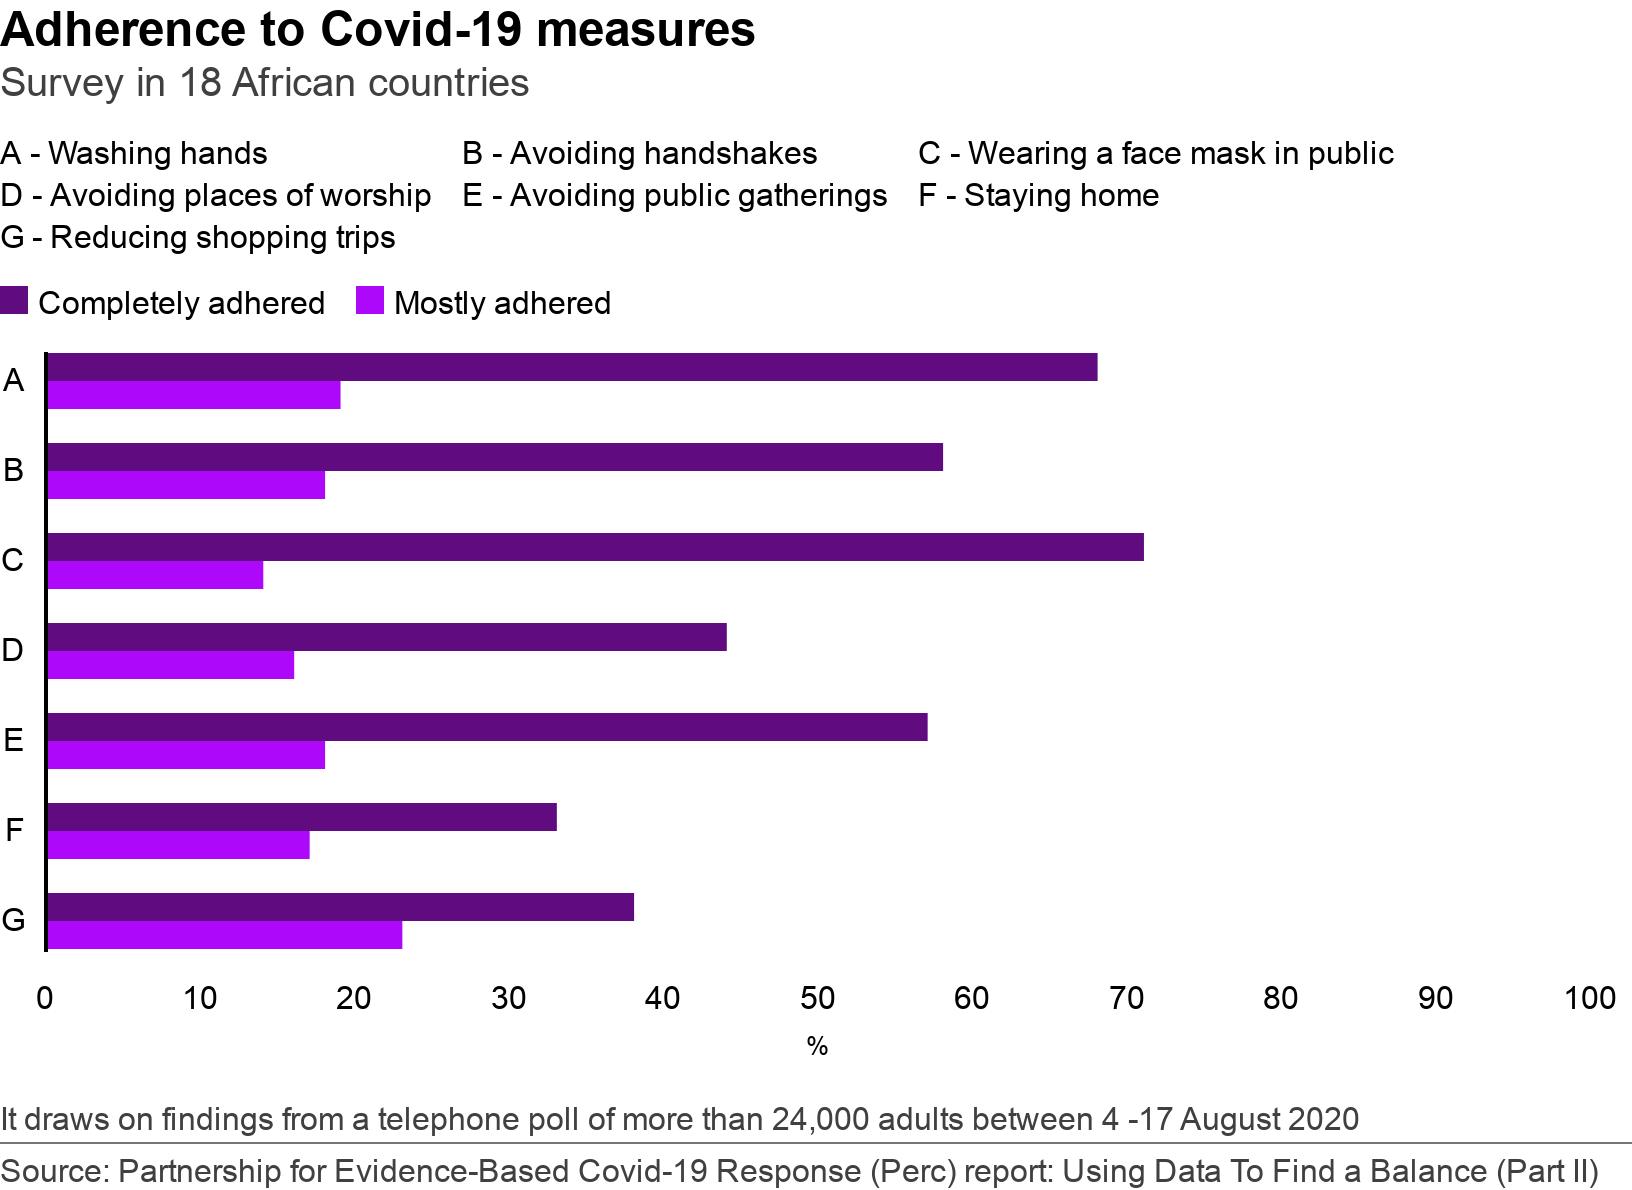 Adherence to Covid-19 measures. Survey in 18 African countries. Self-reported adherence to coronavirus measures in Africa. The report draws on findings from a telephone poll of more than 24,000
adults in 18 AU Member States (conducted between 4 and 17 August, 2020) as
well as social, economic, epidemiological, population movement, media and
security data.  It draws on findings from a telephone poll of more than 24,000 adults between  4 -17 August 2020.